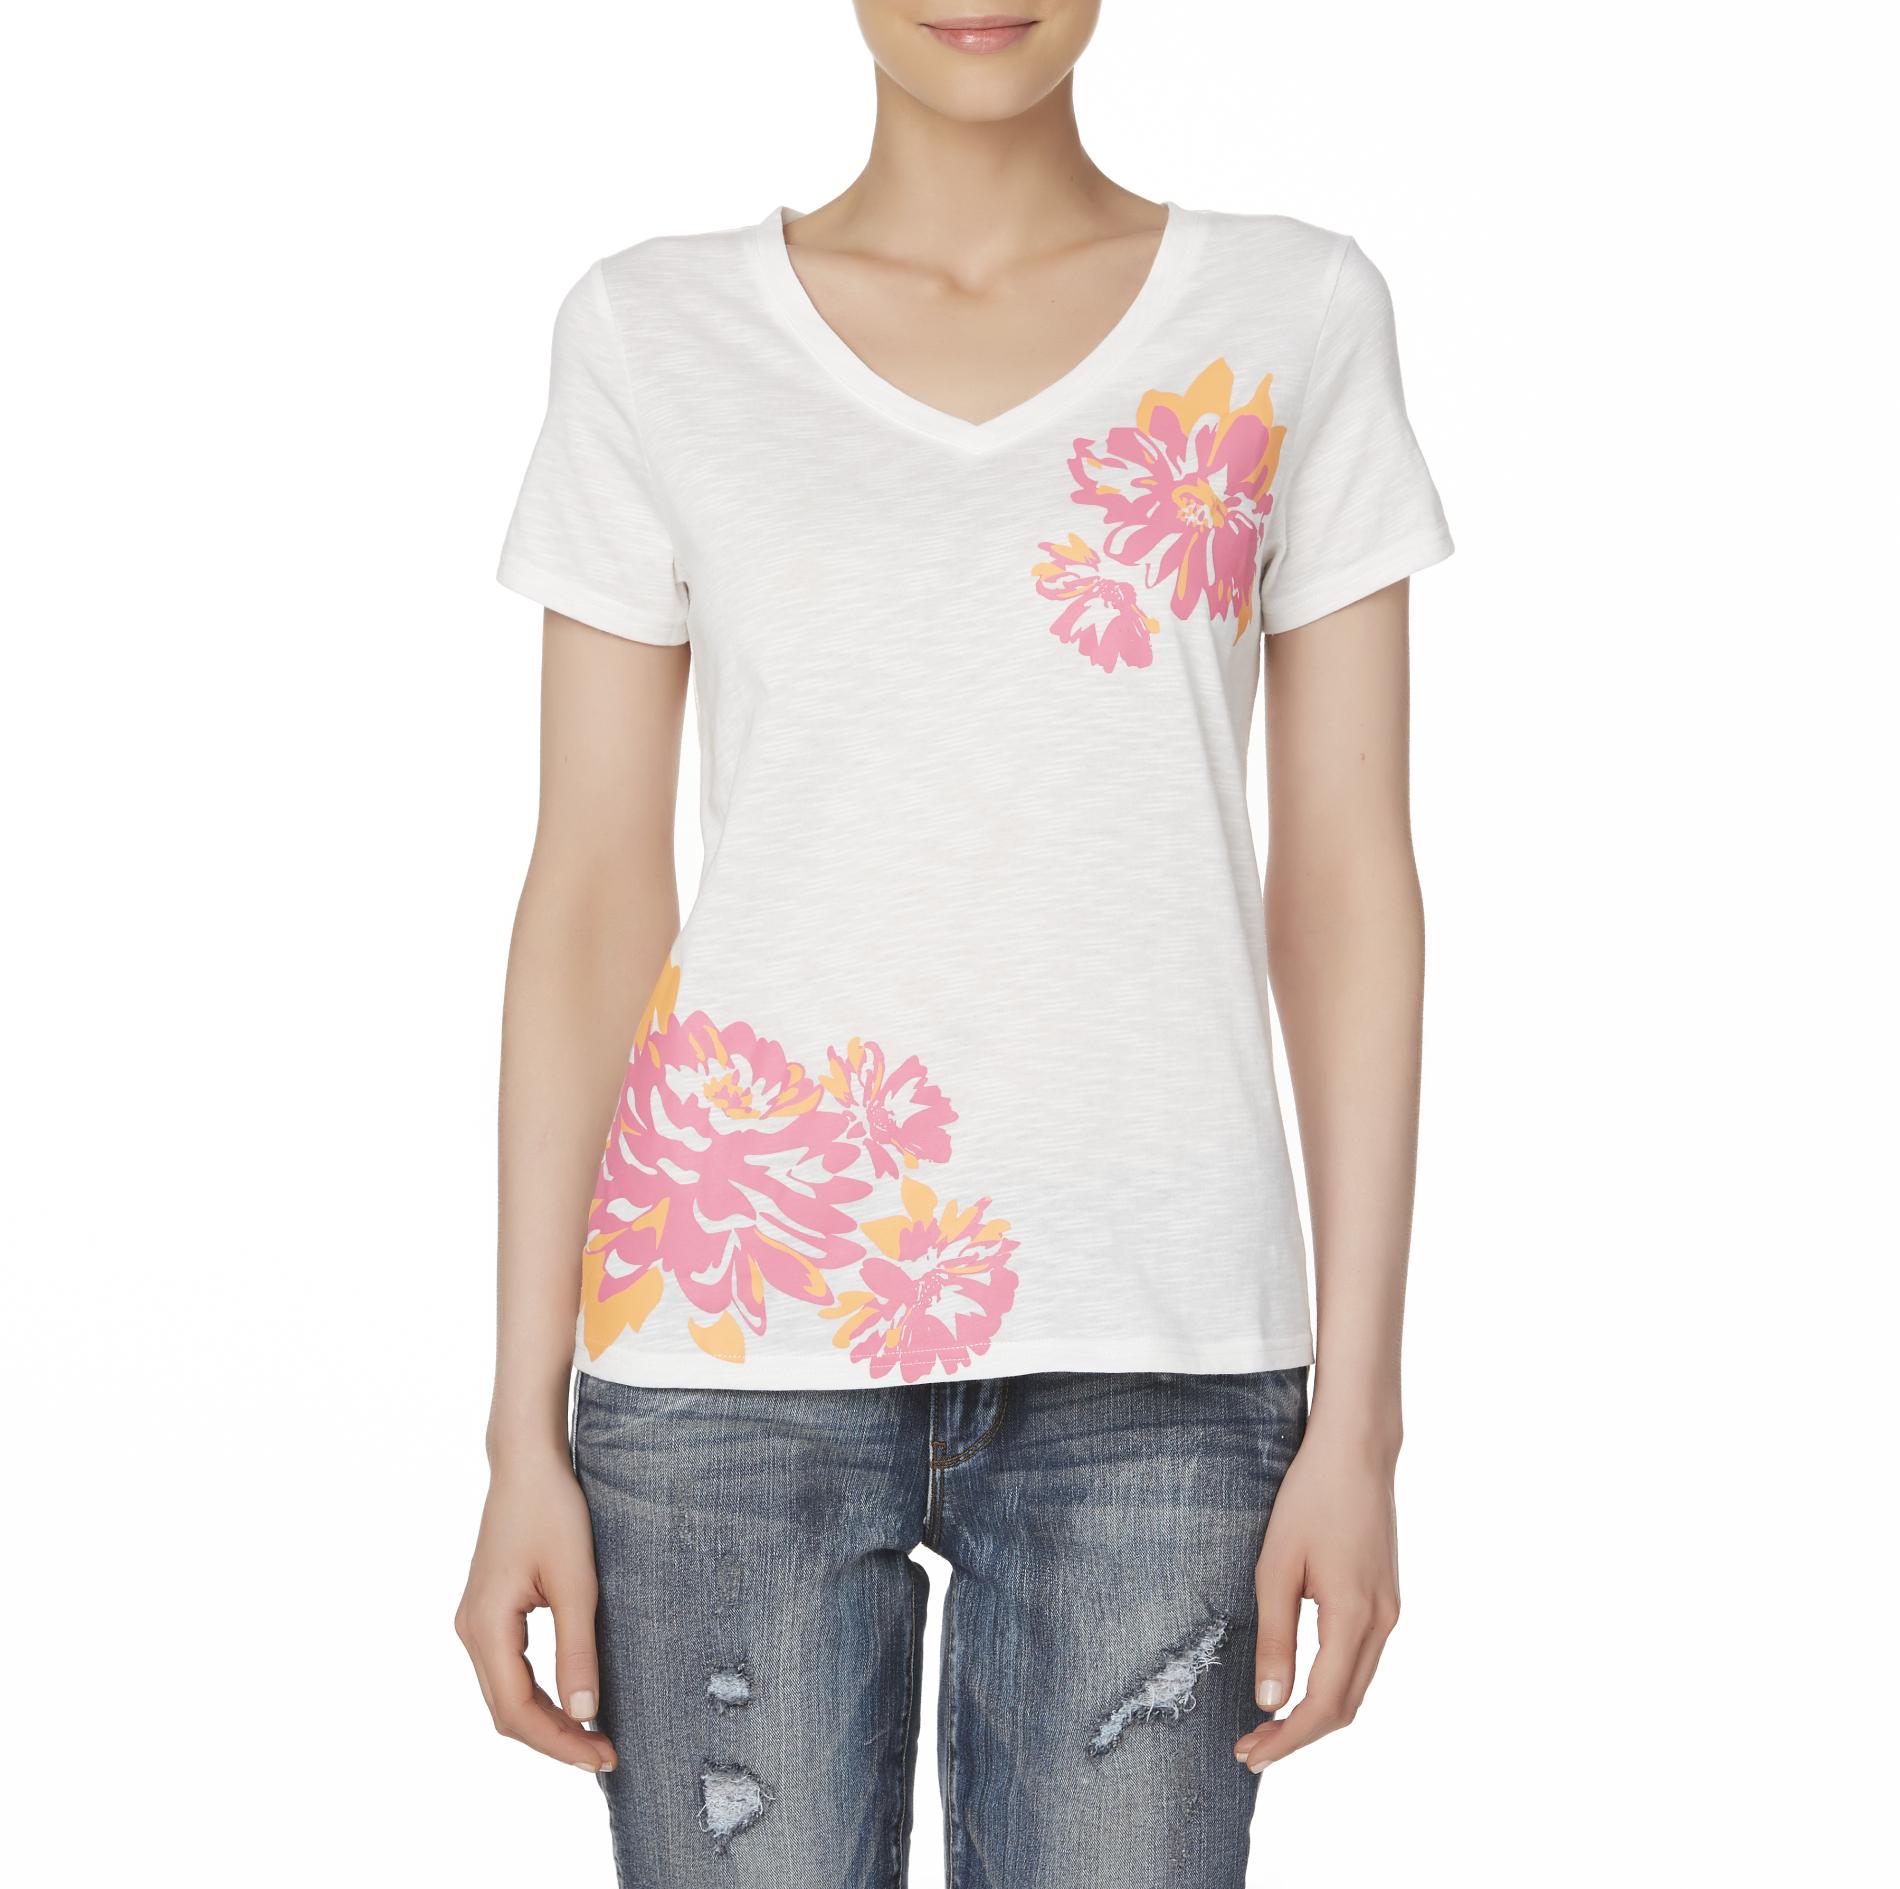 Basic Editions Women's Graphic V-Neck T-Shirt - Floral